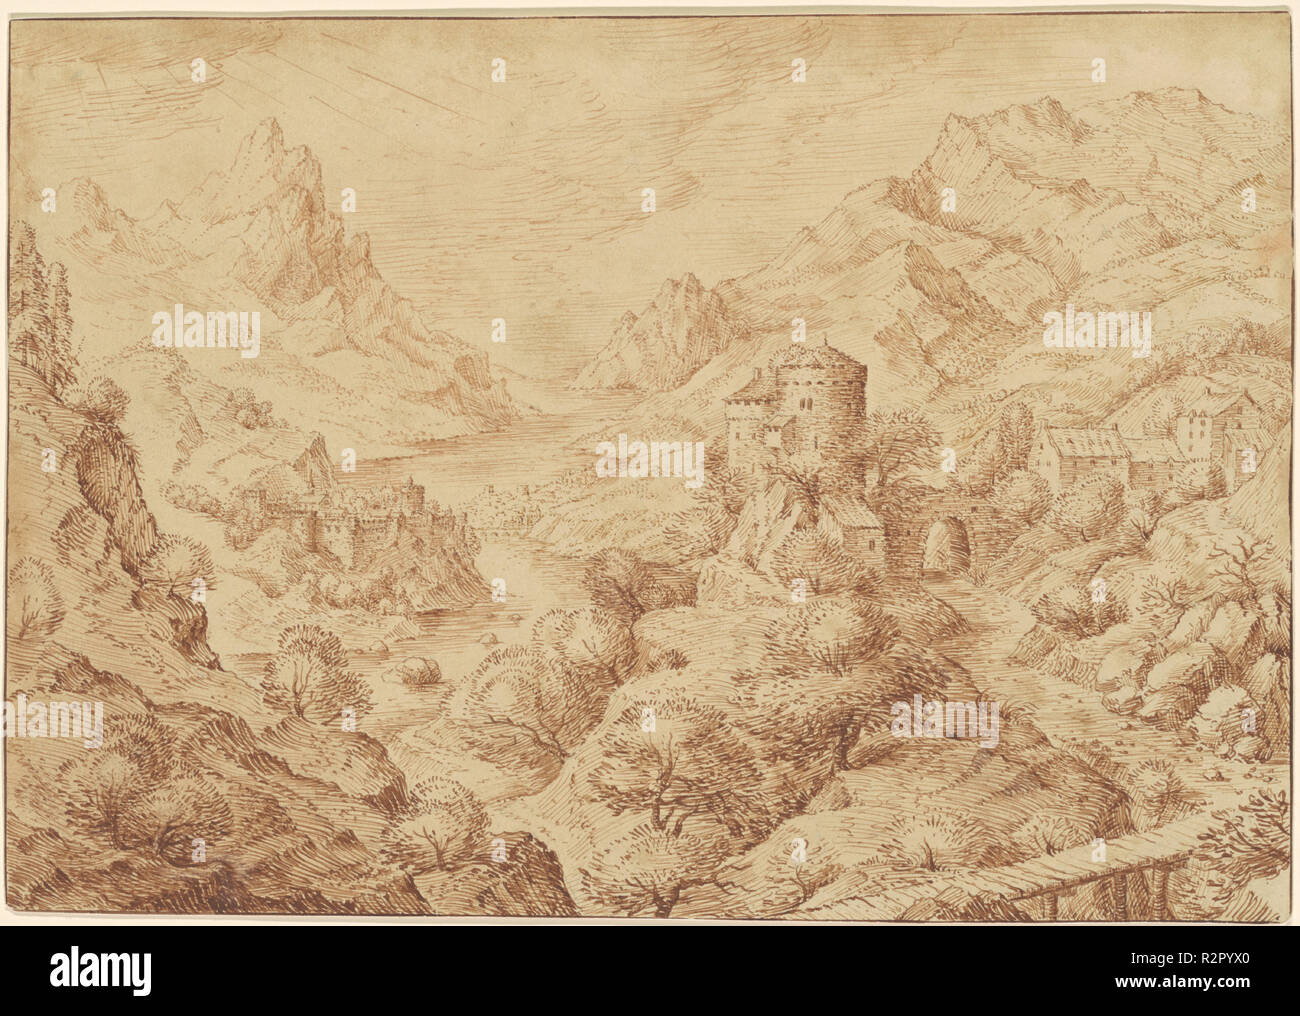 Panoramic River Landscape. Dated: c. 1590. Dimensions: sheet: 23.1 × 33.2 cm (9 1/8 × 13 1/16 in.). Medium: pen and brown ink over traces of black chalk on laid paper. Museum: National Gallery of Art, Washington DC. Author: Jacob Savery I. Stock Photo